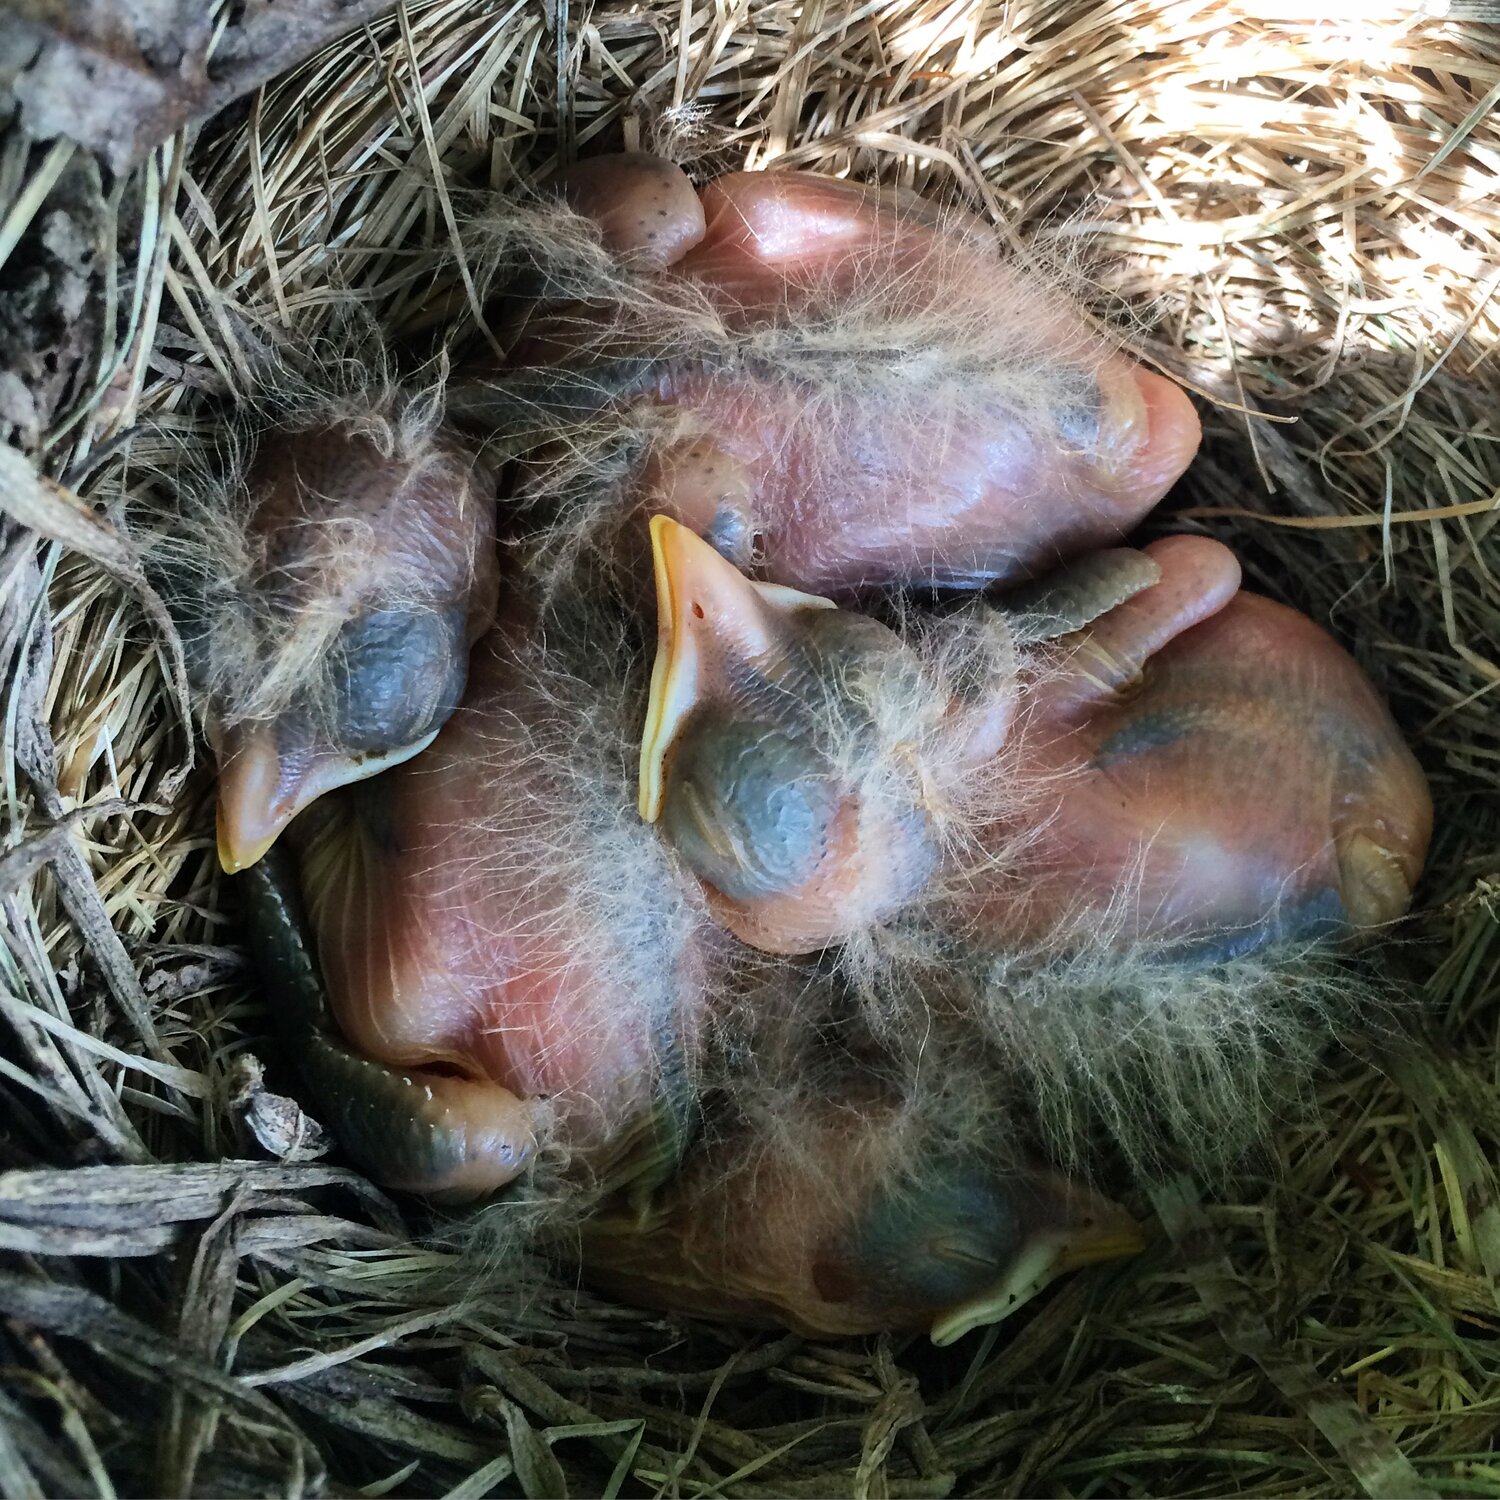 Baby robins are born helpless and mostly feather-less except for delicate tufts of white down.